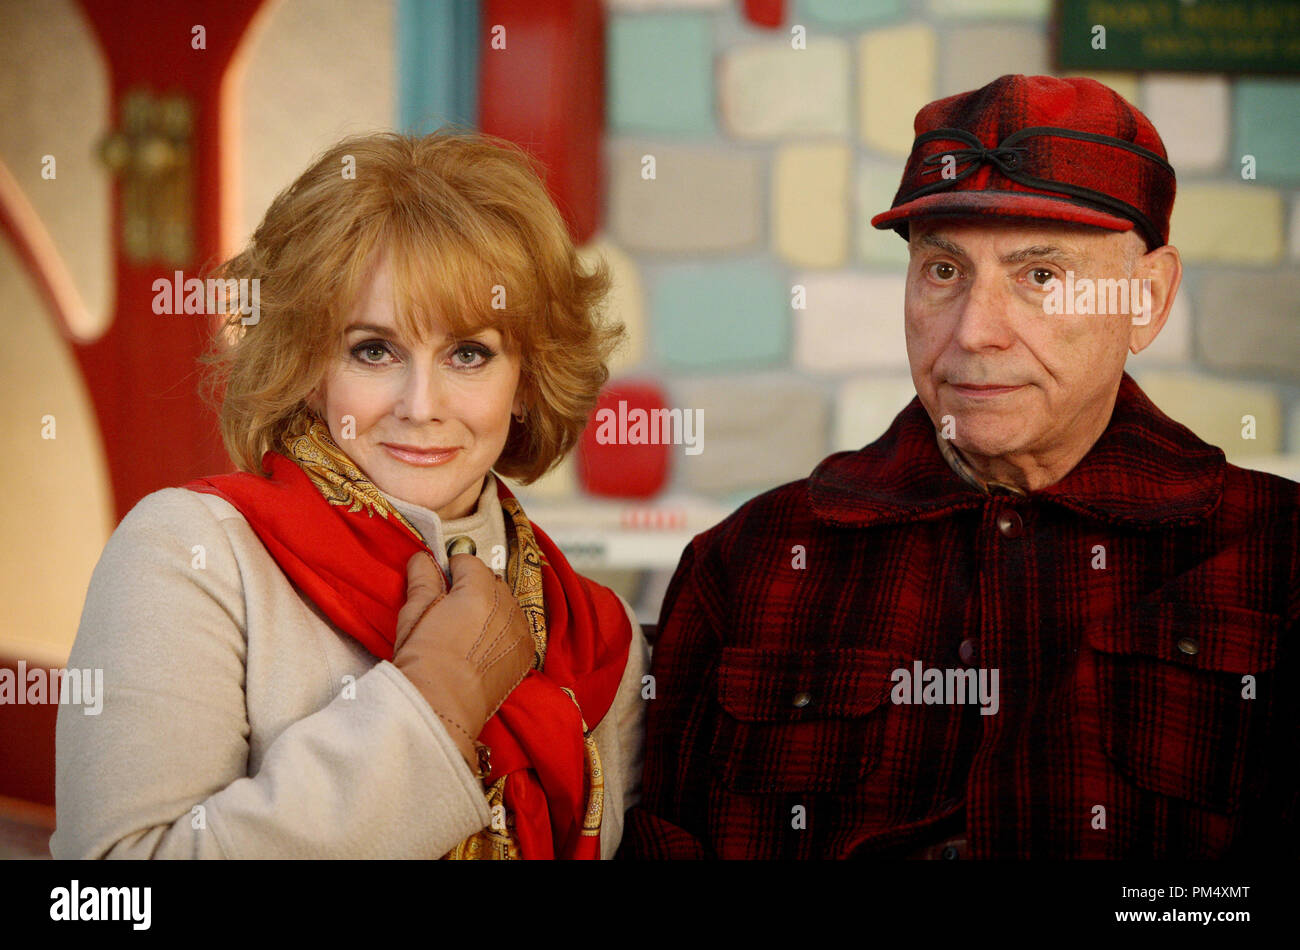 Studio Publicity Still from 'The Santa Clause 3: The Escape Clause' Ann-Margret, Alan Arkin © 2006 Disney Enterprises, Inc. Photo credit: Joseph Lederer   File Reference # 307372594THA  For Editorial Use Only -  All Rights Reserved Stock Photo